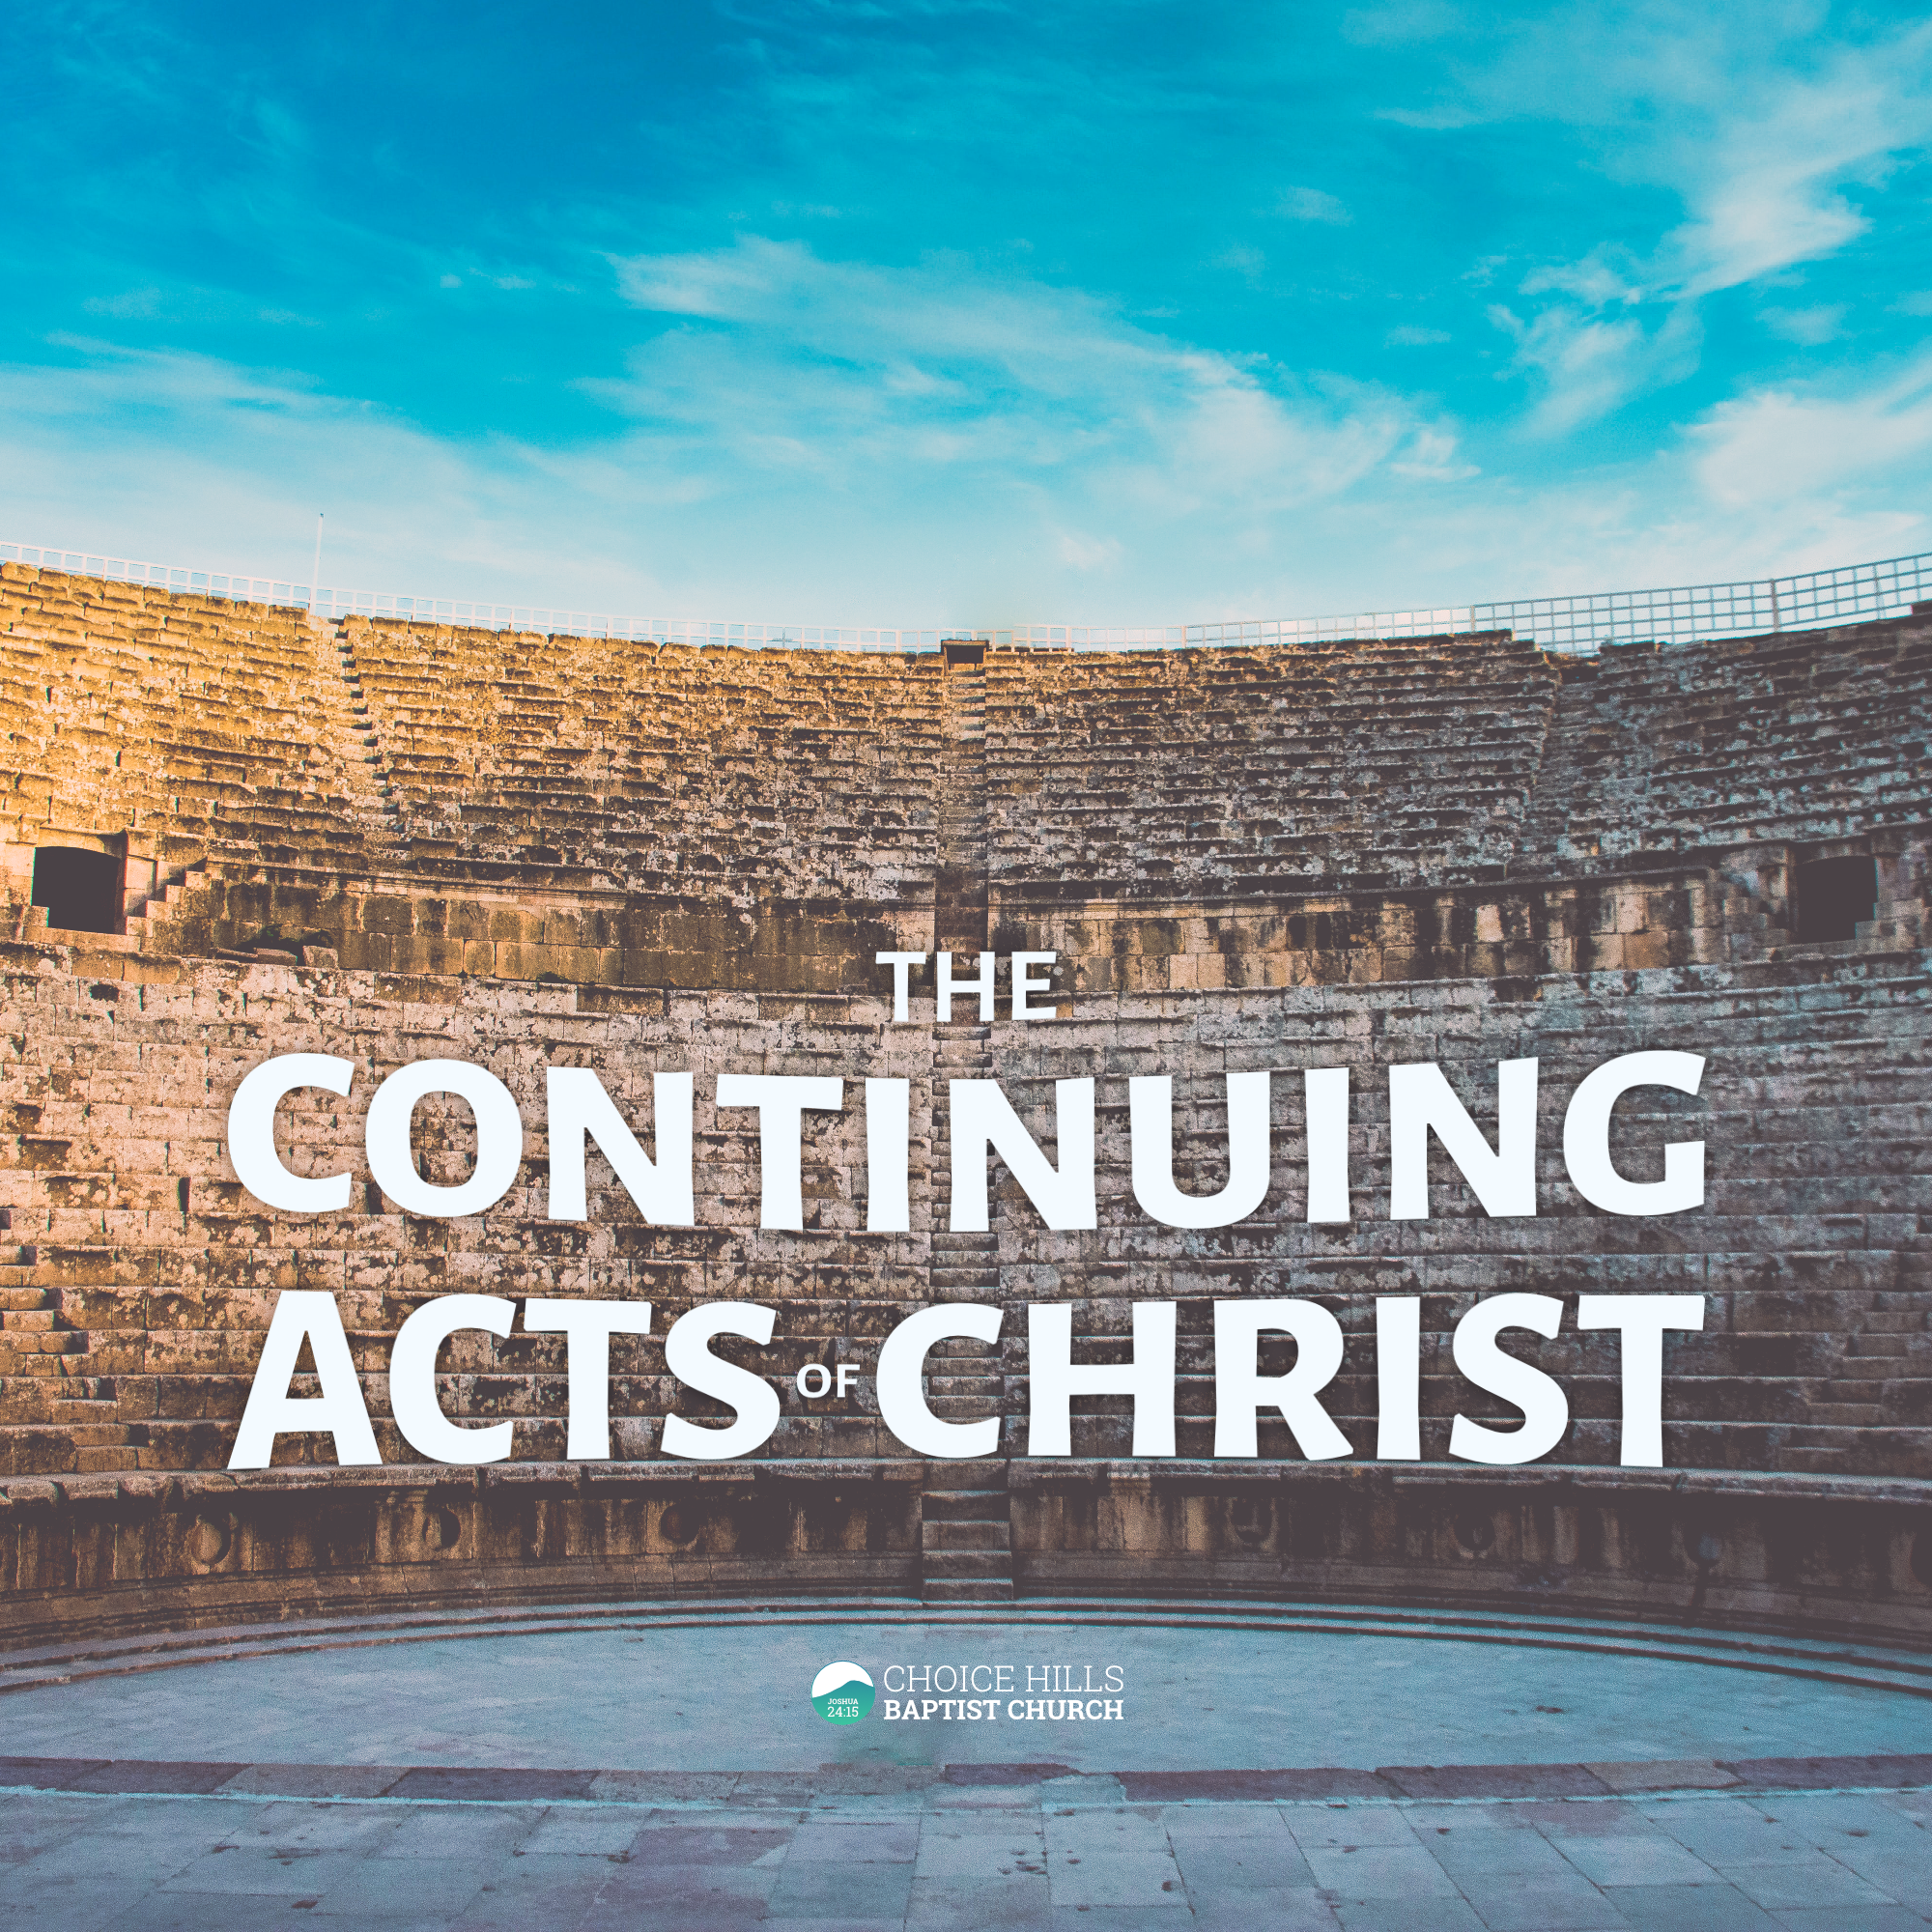 The Acts Account of the Great Commission: Christ's Commission Our Command / The Continuing Acts of Christ—A Study of the Book of Acts